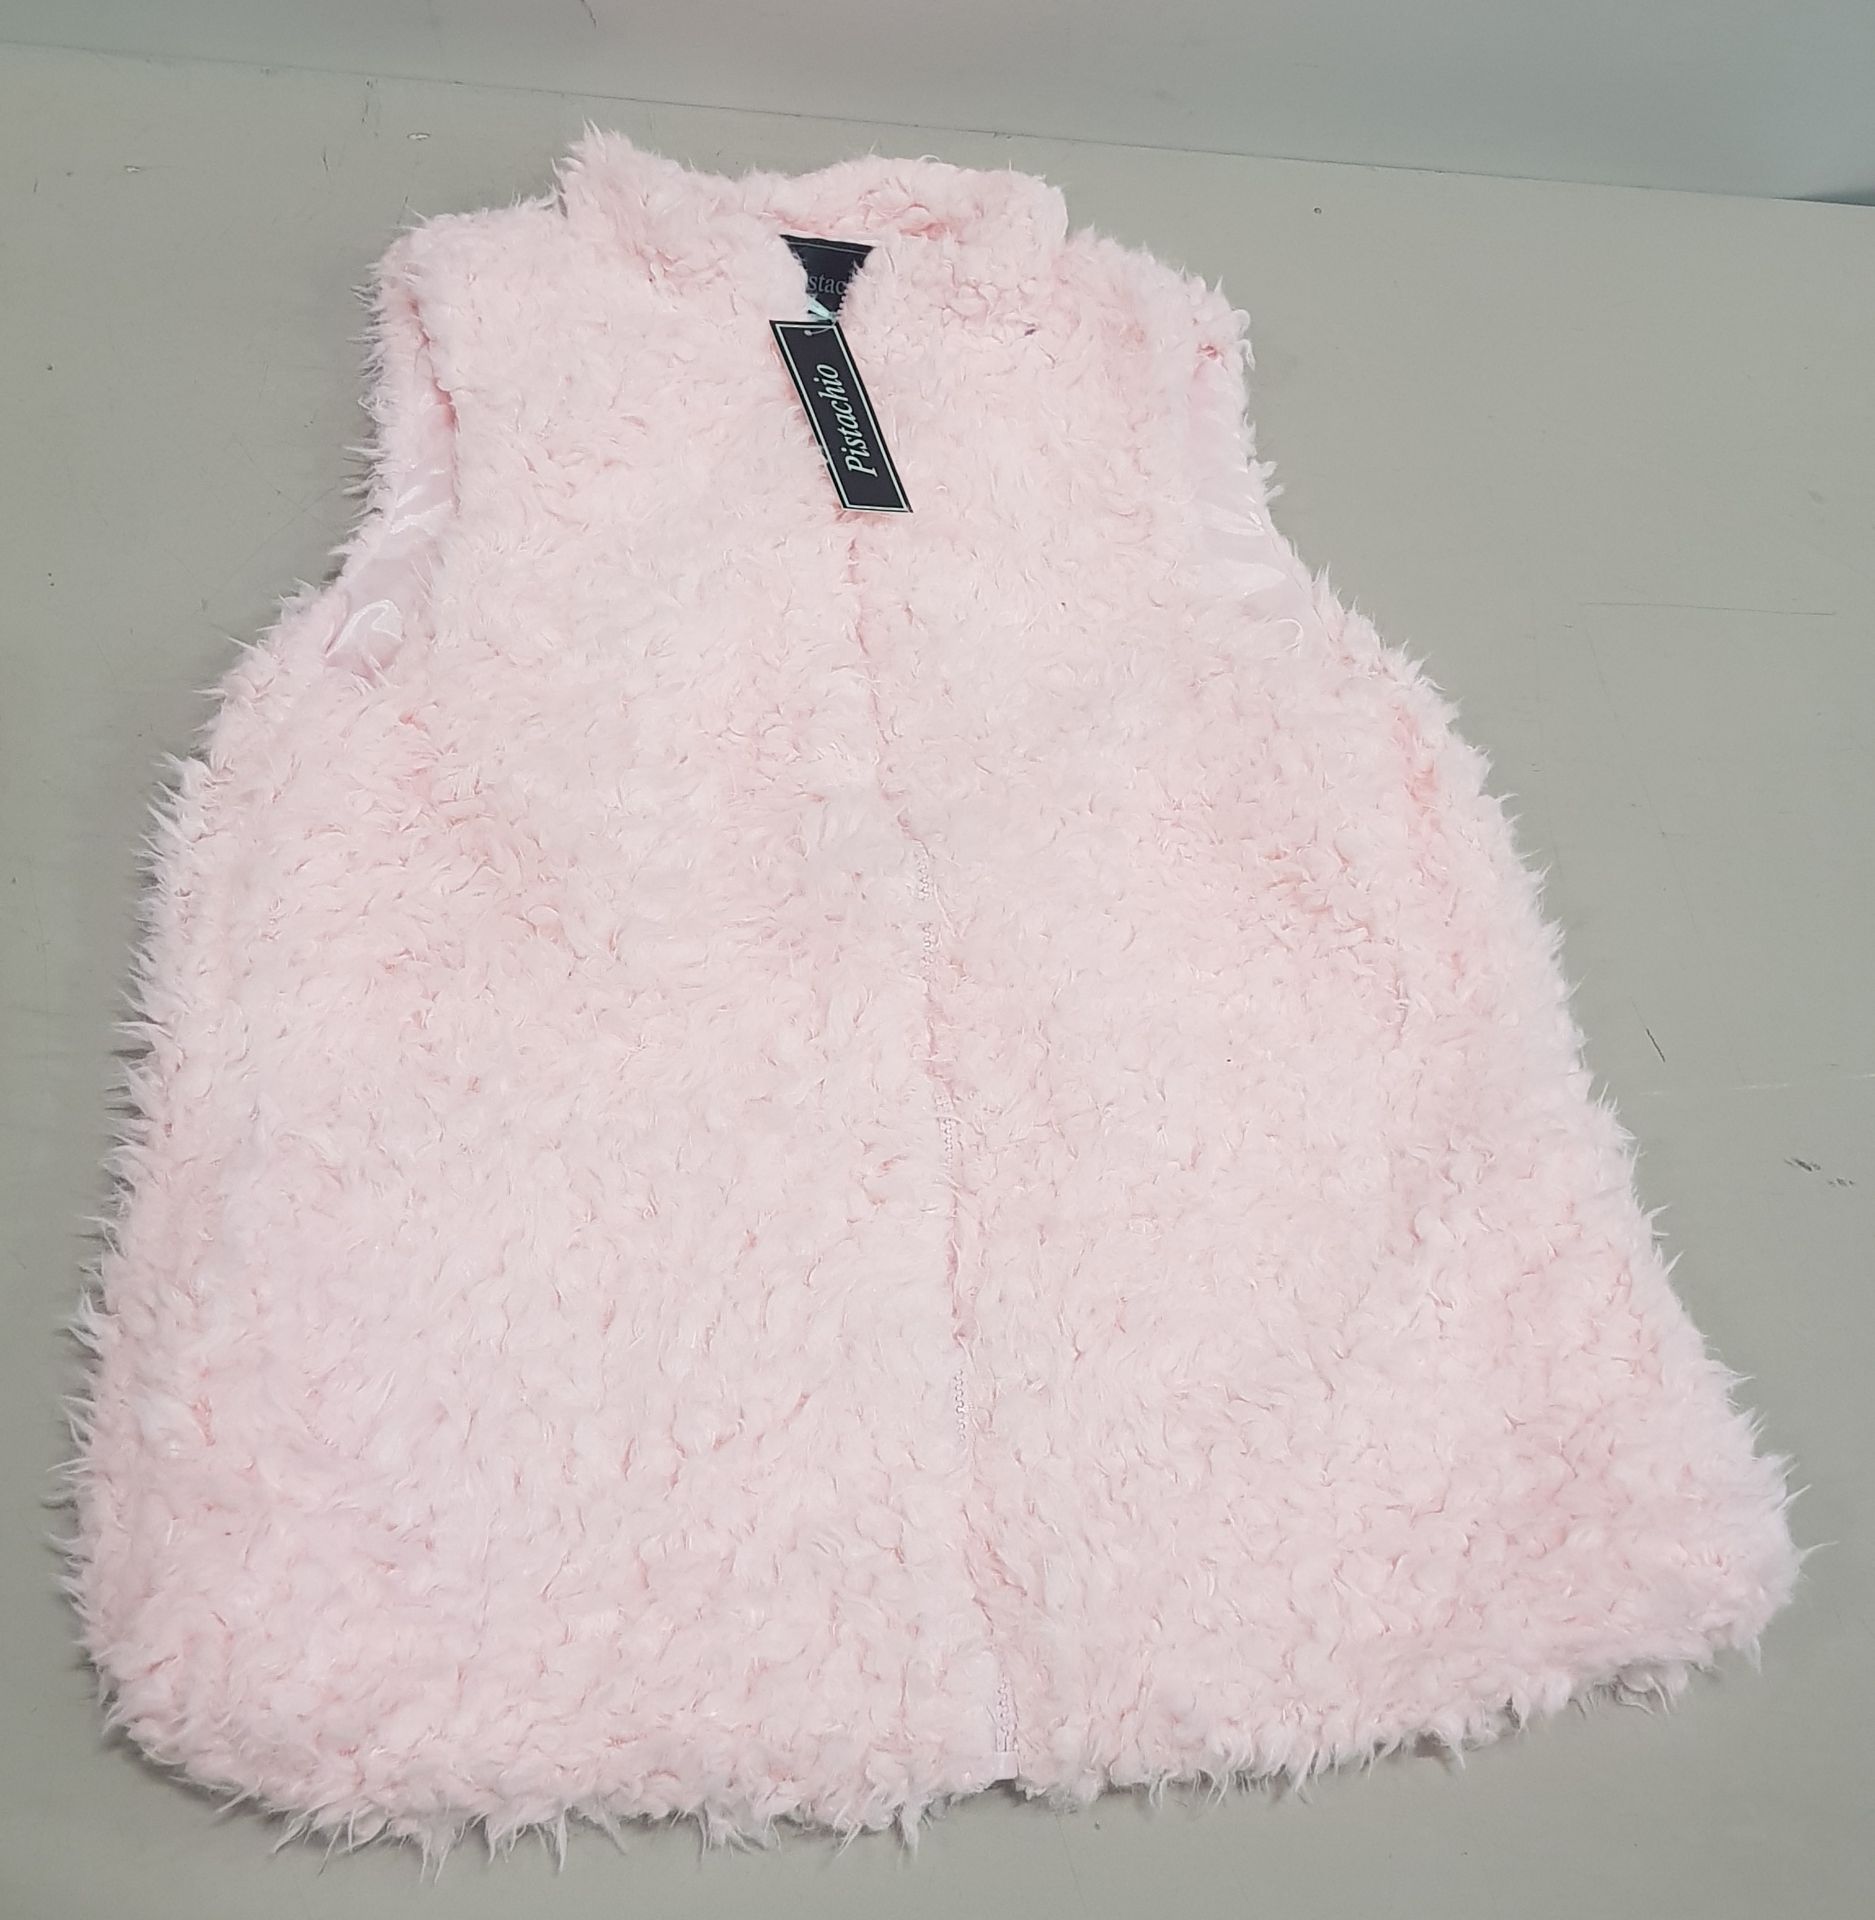 20 X BRAND NEW PISTACHIO FAUX FUR WOMANS VESTS - ALL IN PINK - ALL IN SIZE SMALL - IN 1 TRAY